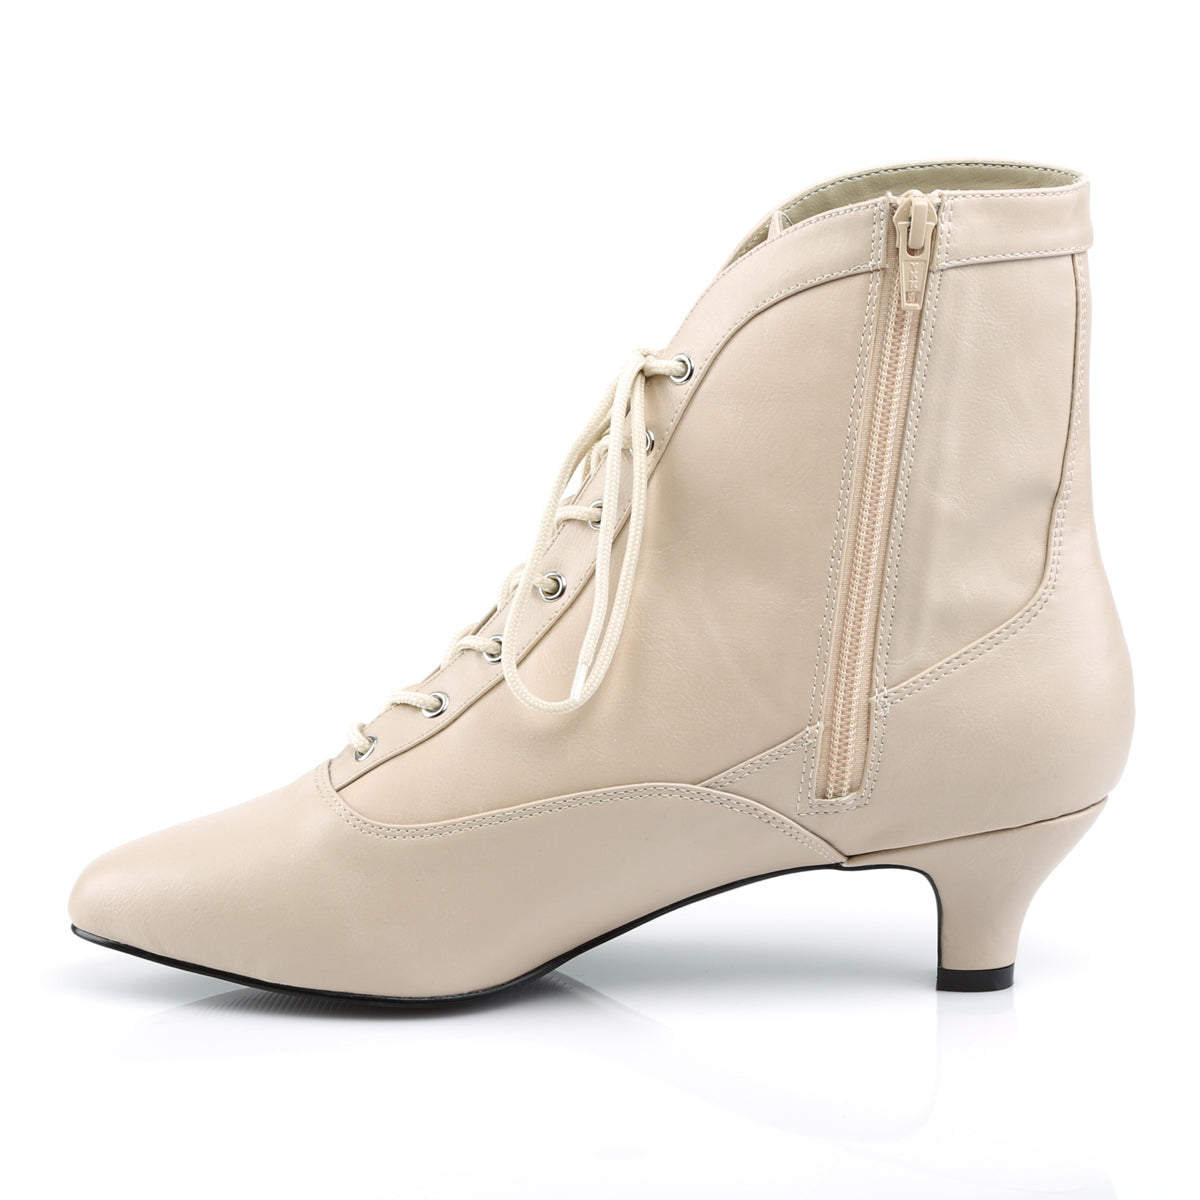 Pleaser Pink Label Womens Ankle Boots FAB-1005 Cream Faux Leather